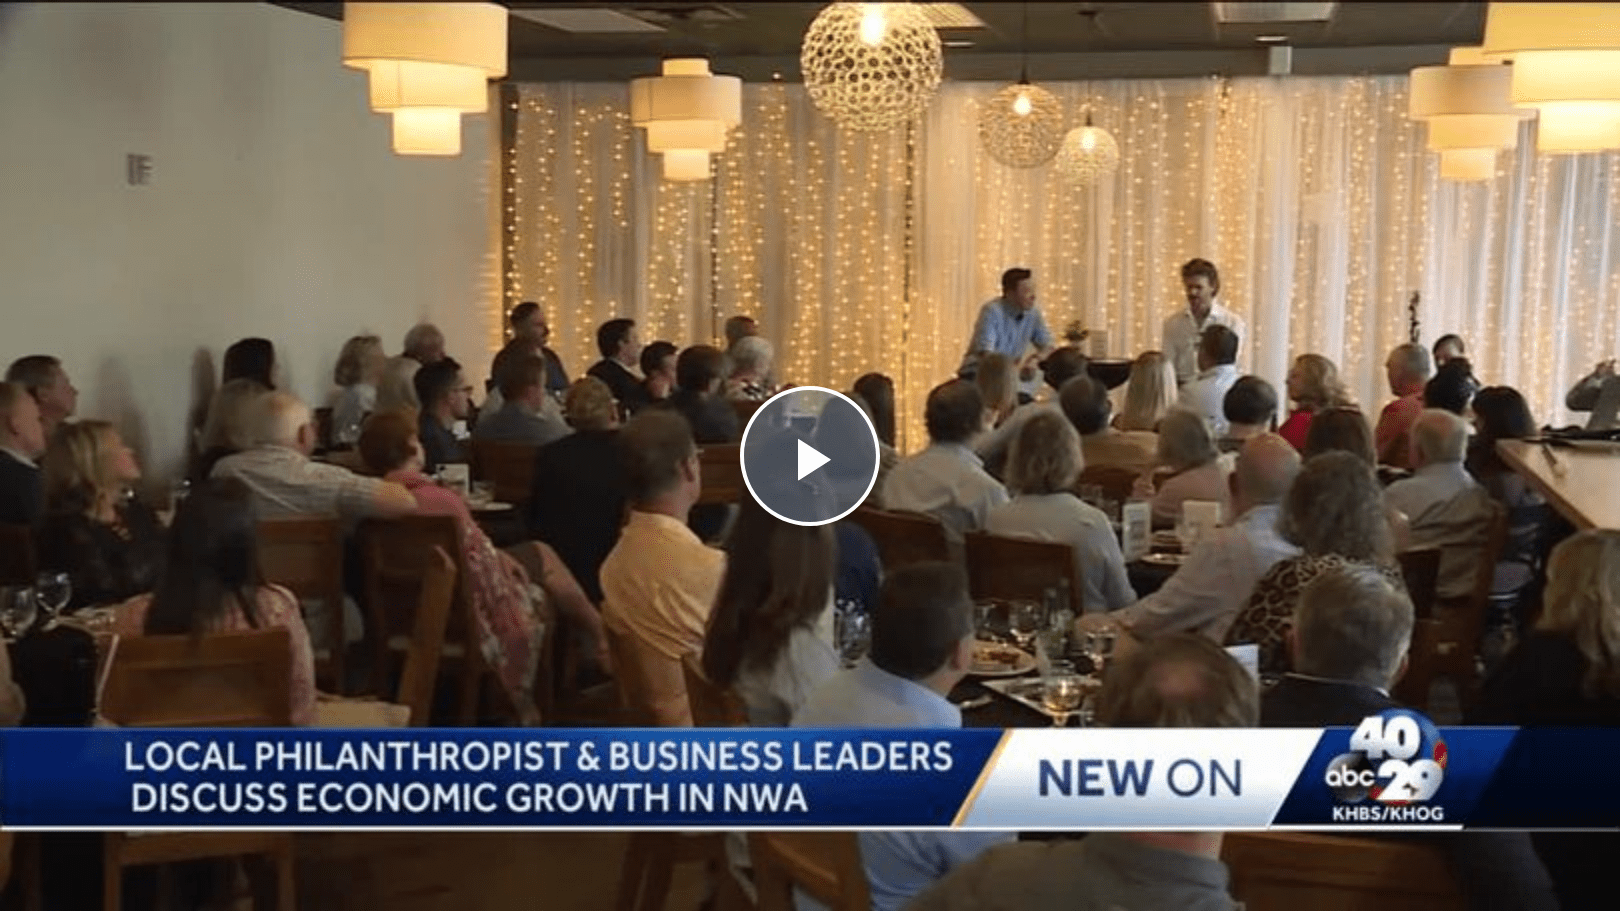 Screenshot at Local philanthropist and business leaders discuss economic growth in NWA